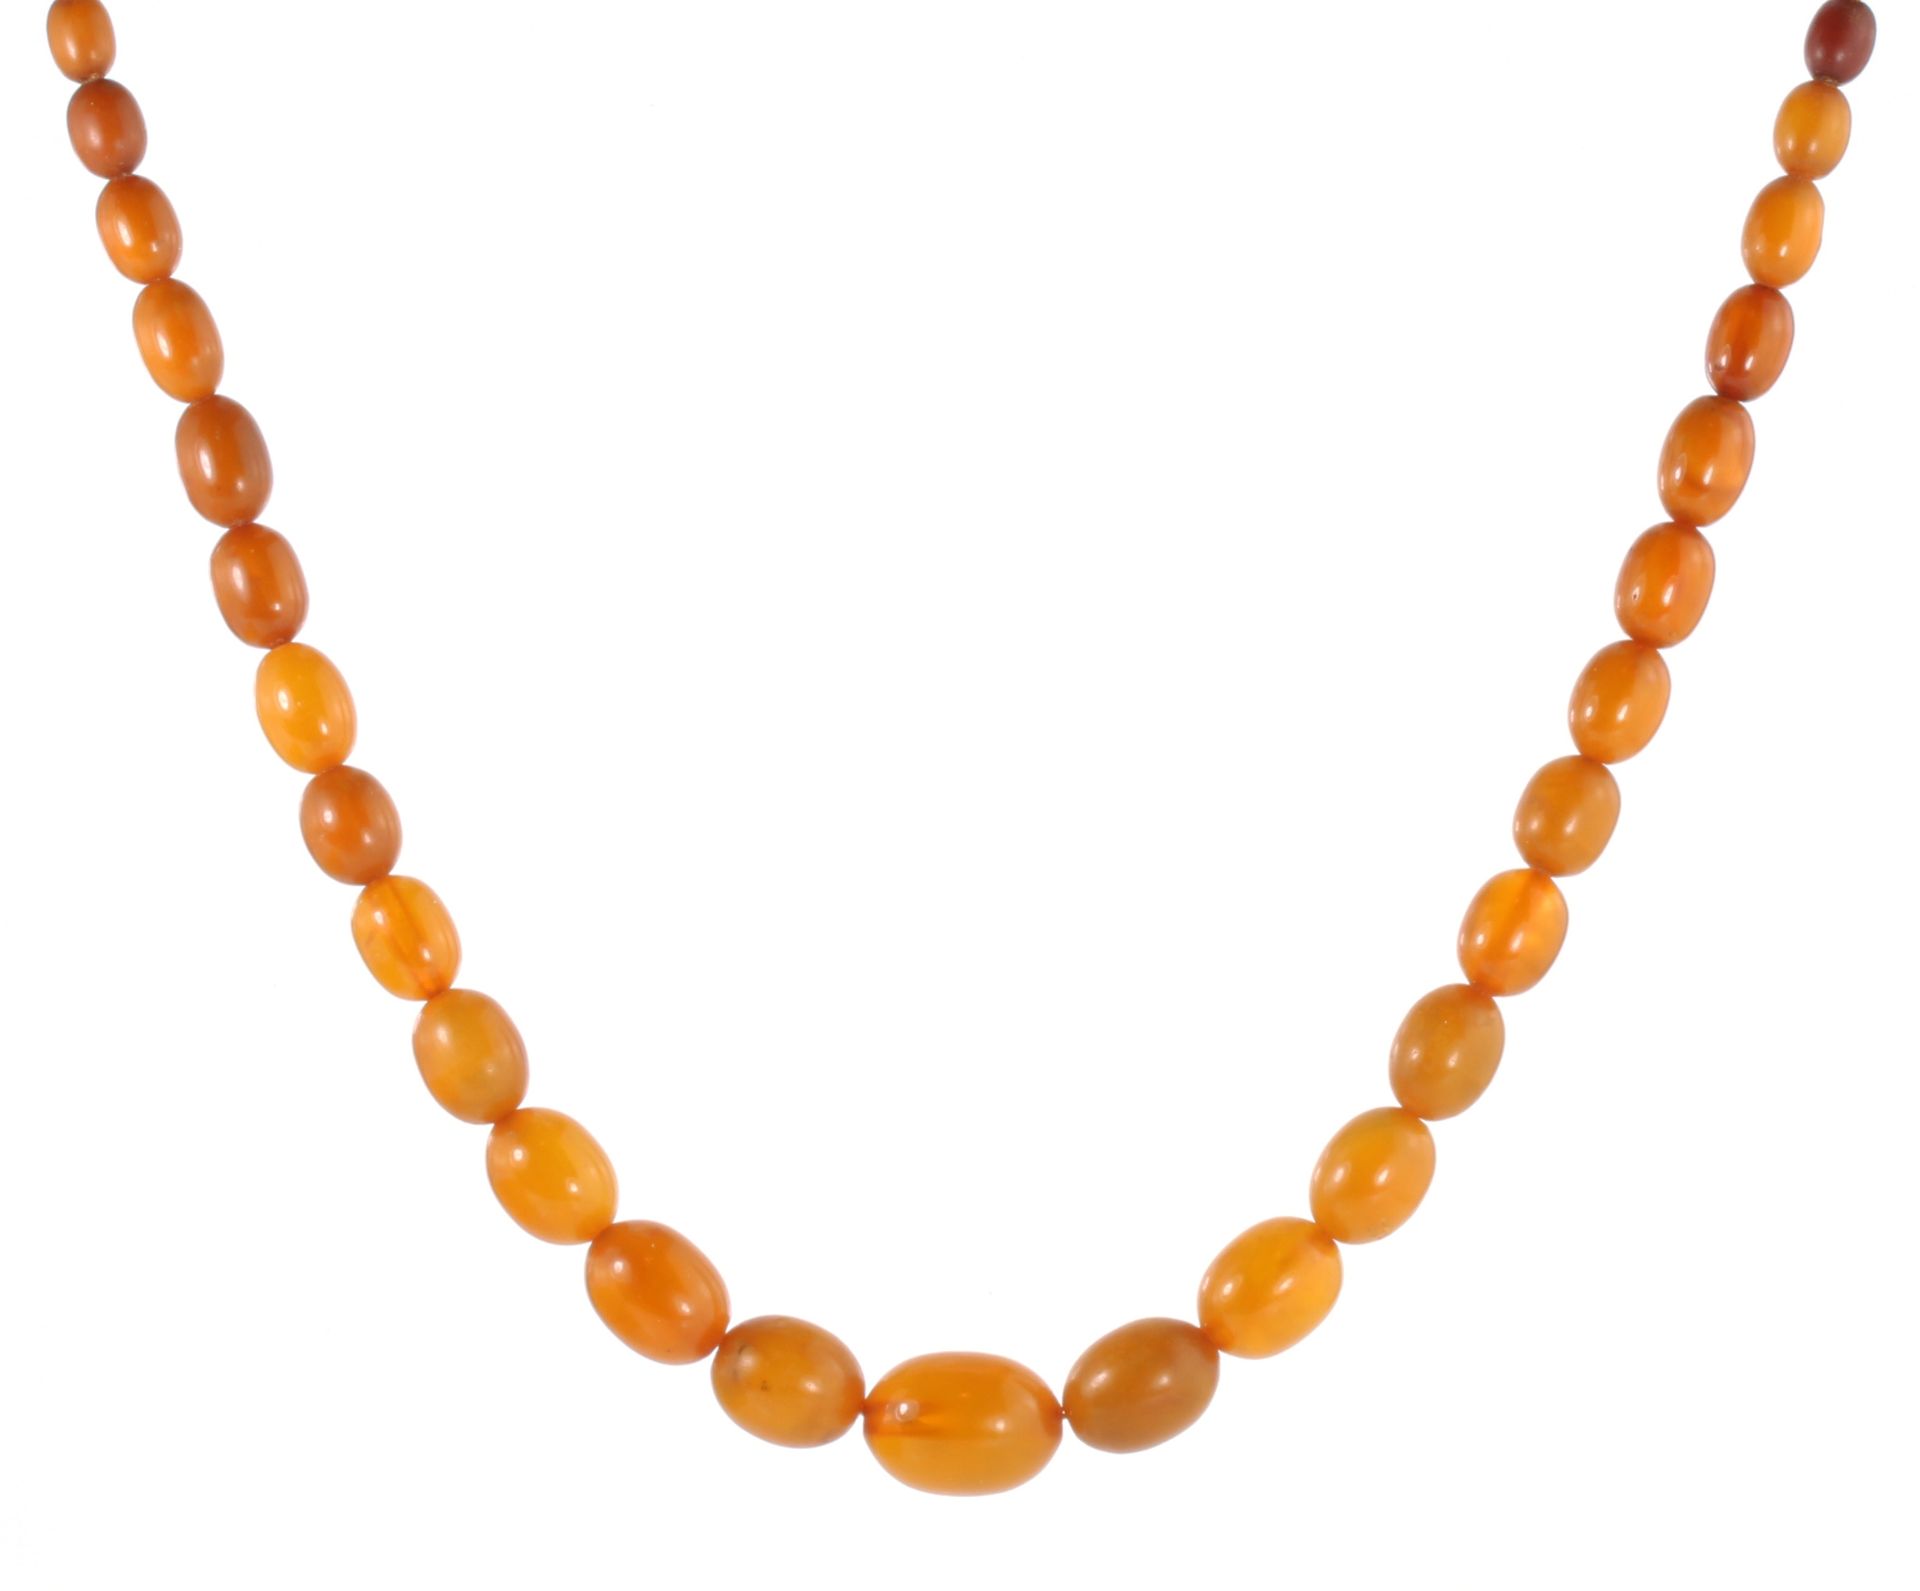 AN ANTIQUE NATURAL AMBER BEAD NECKLACE comprising a single row of seventy-three graduated polished